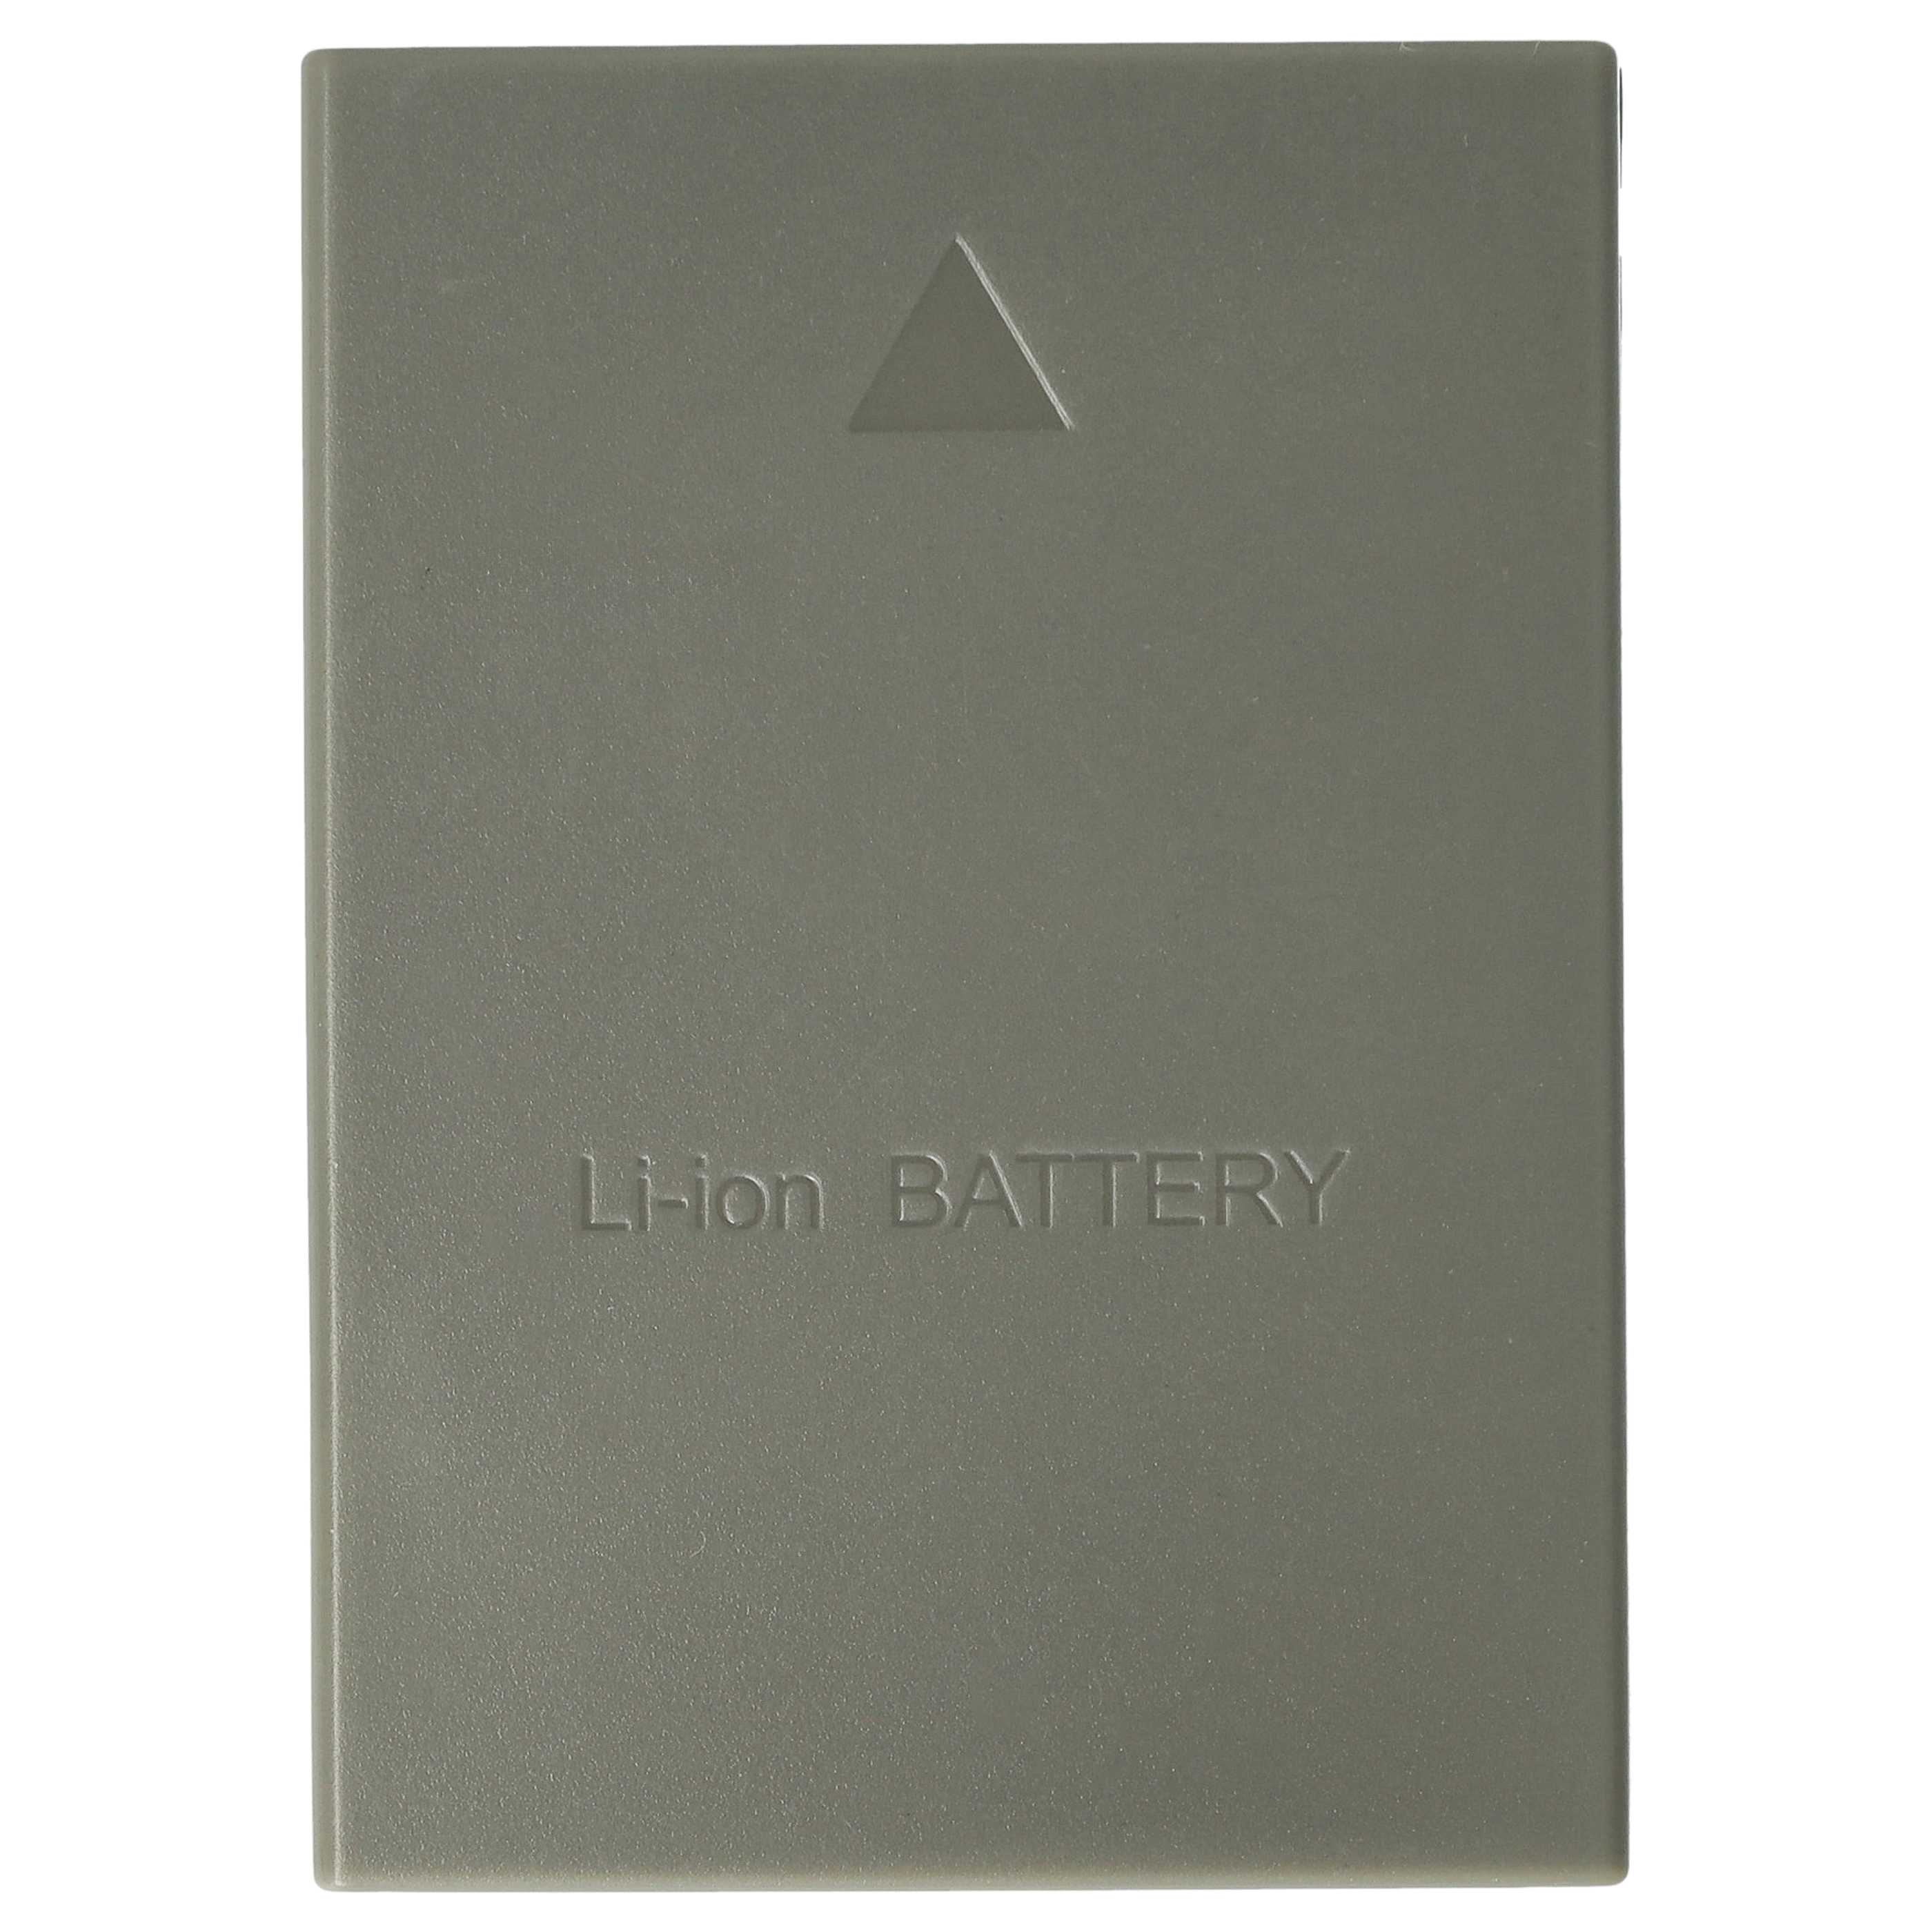 Battery Replacement for Olympus PS-BLN1 - 850mAh, 7.6V, Li-Ion with Info Chip